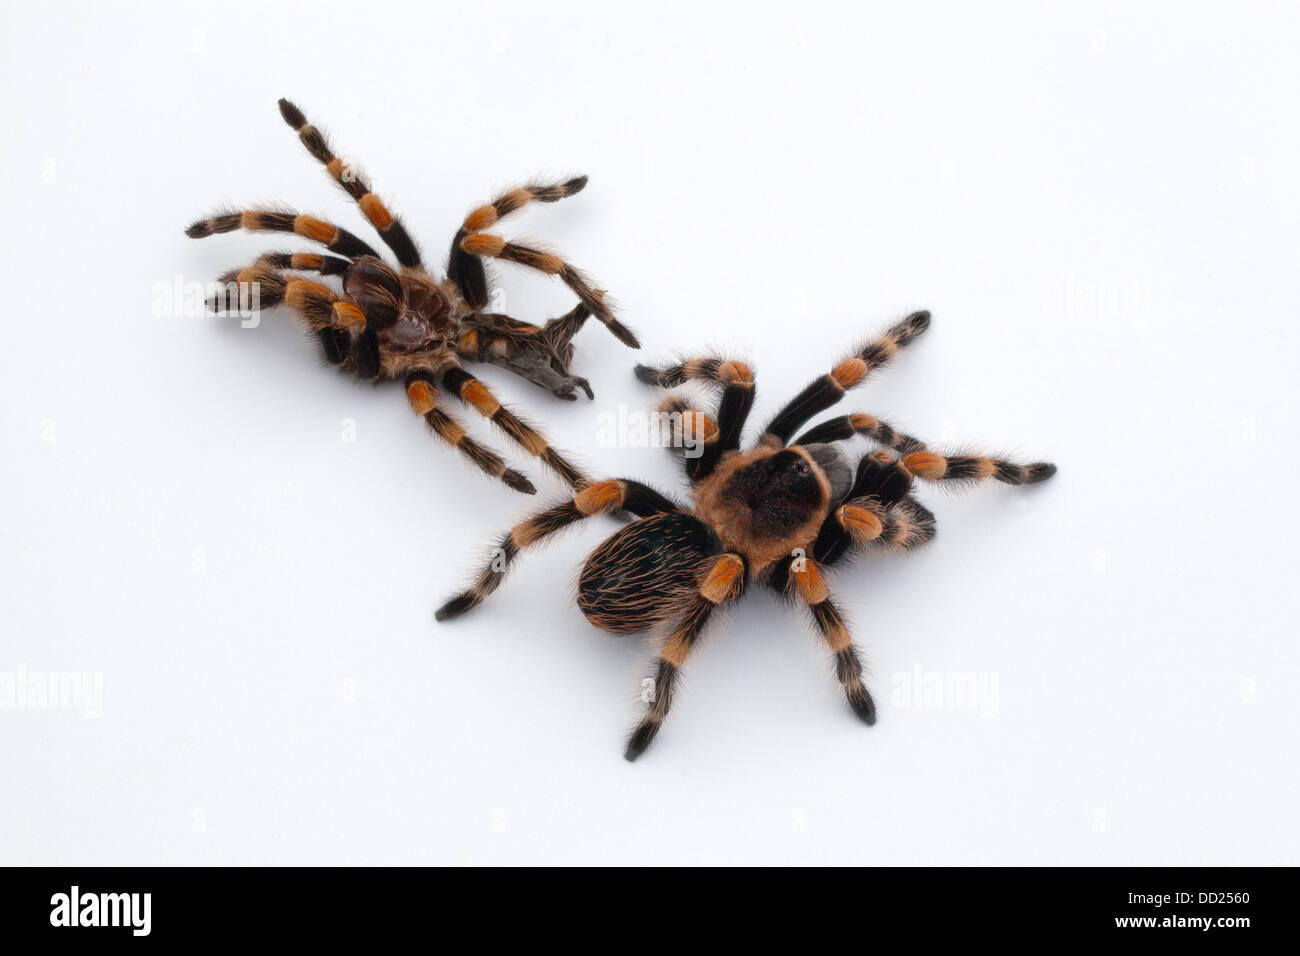 Mexican Red-kneed Tarantula Spider (Brachypelma smithi). Shed, moulted skin or exo-skeleton top, living spider below. Stock Photo